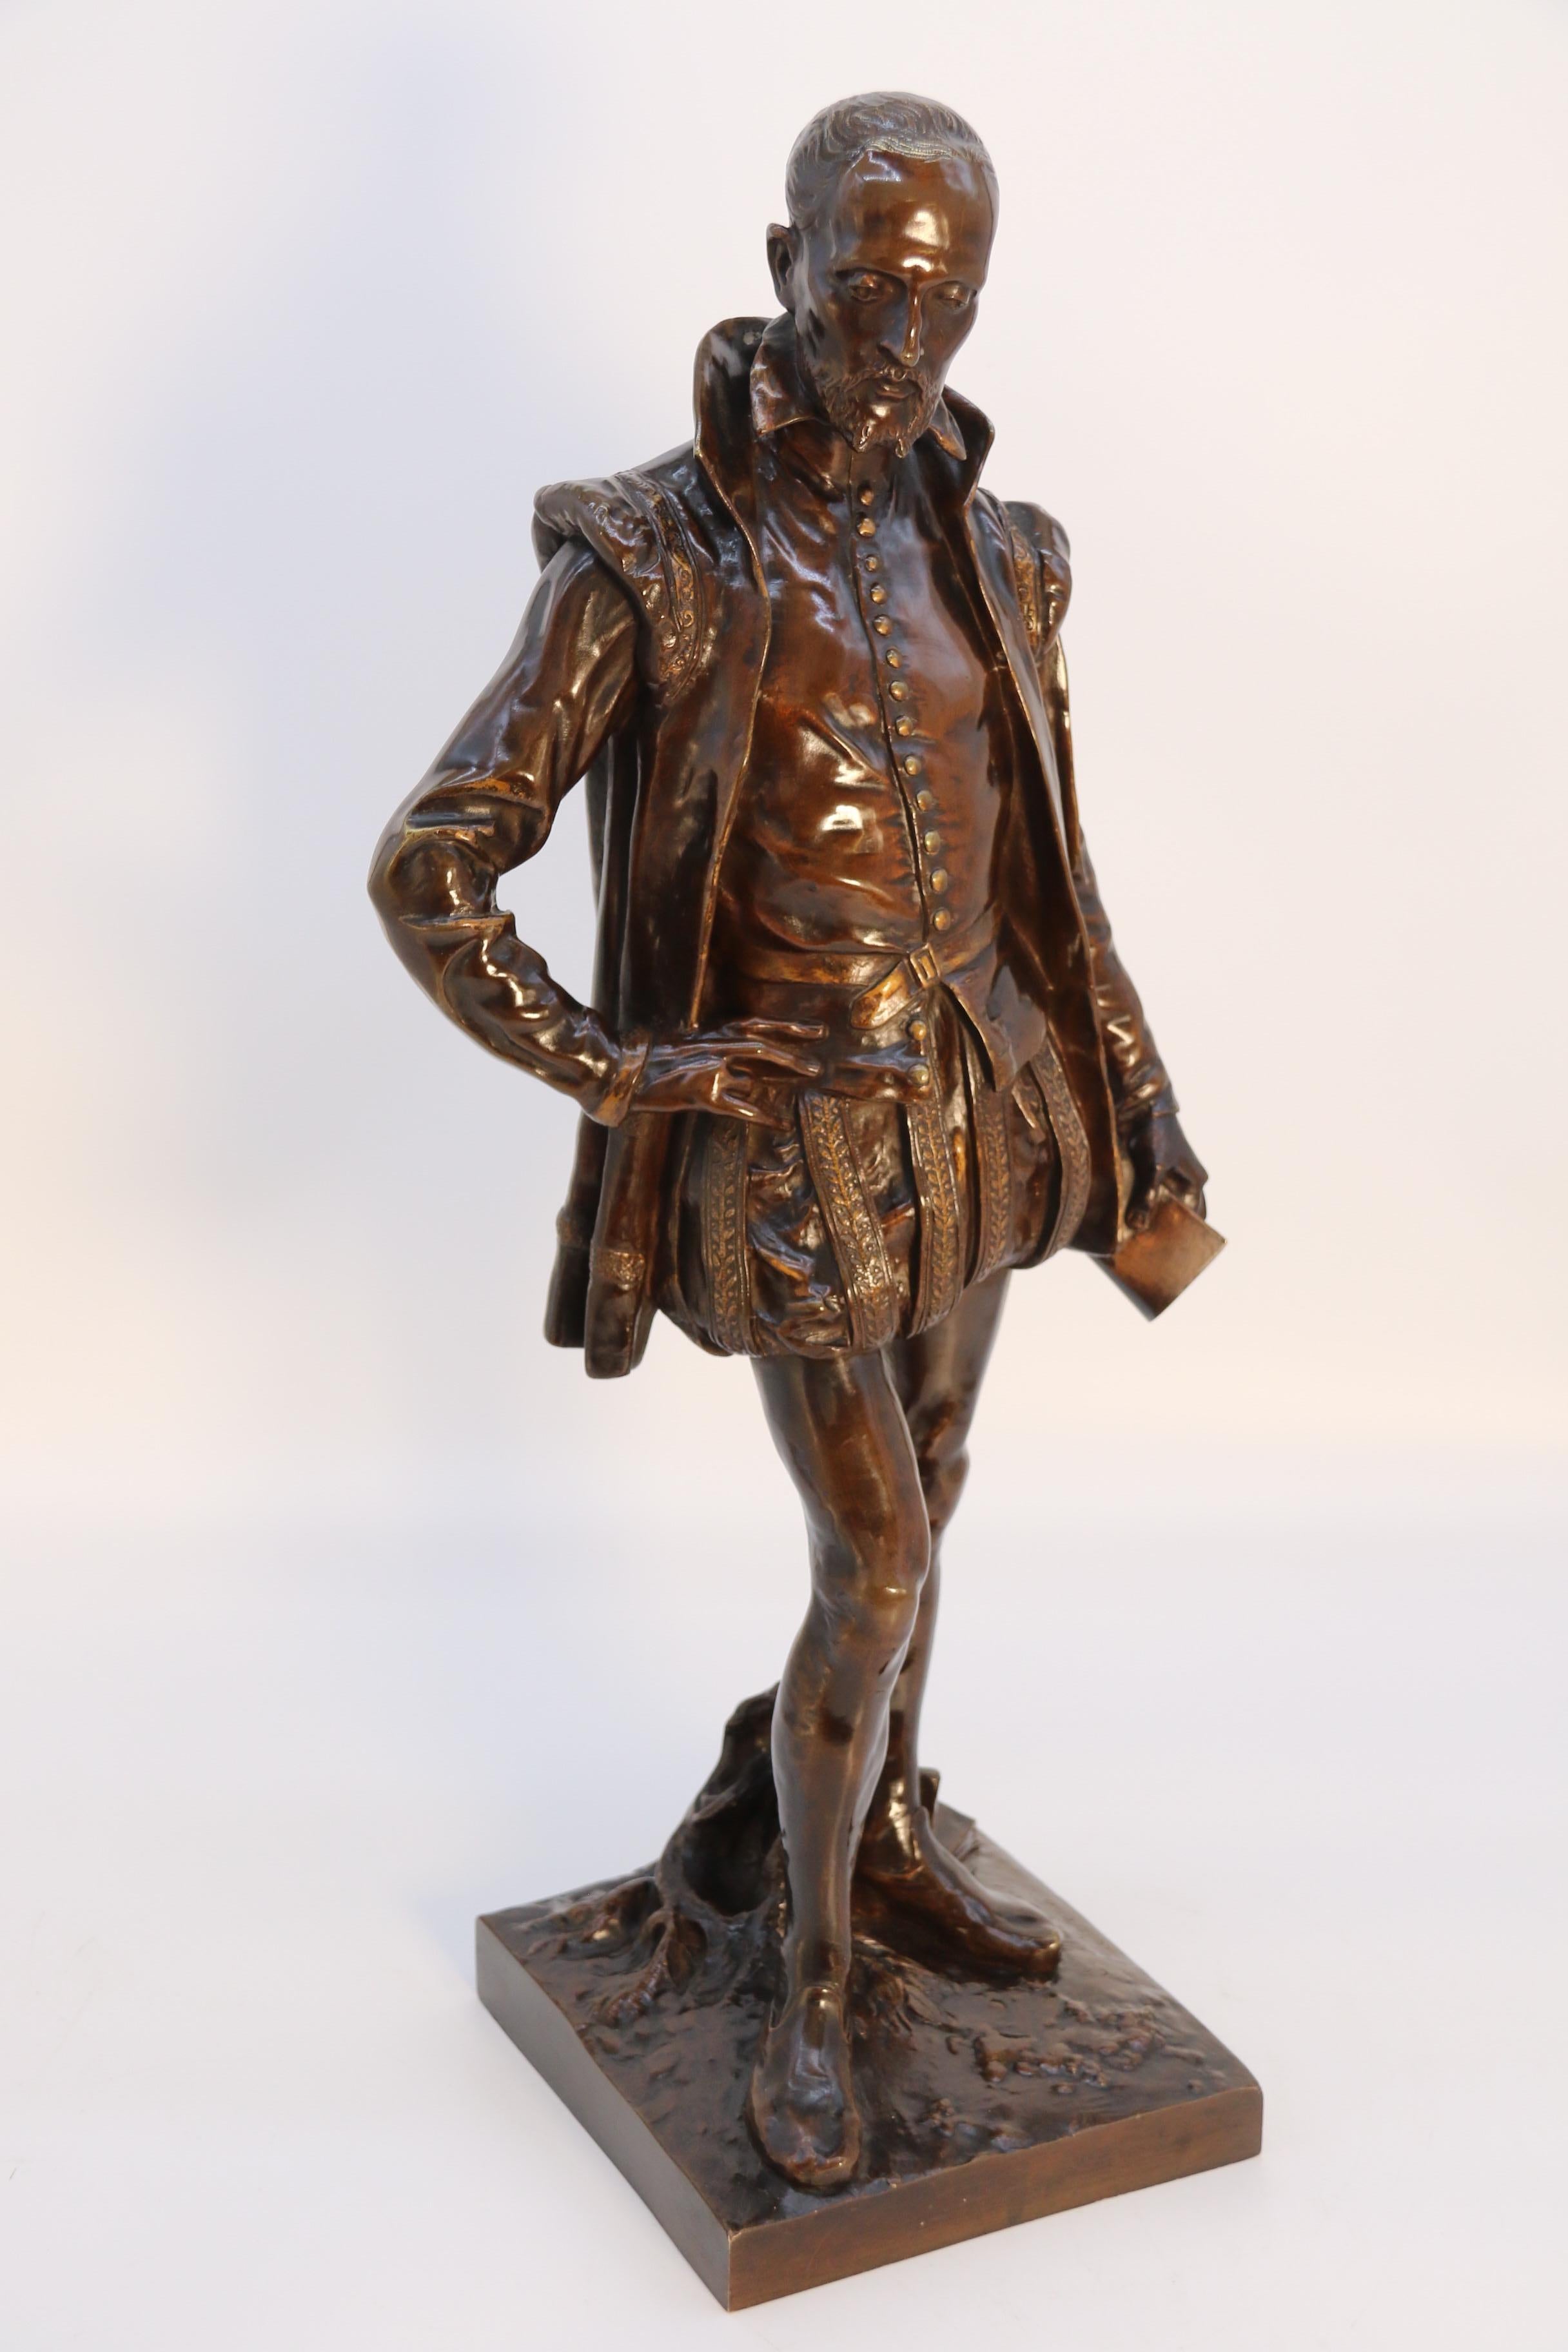 The 19th century bronze study of the French poet Joachim de Bellay by L Adolphe en vente 3